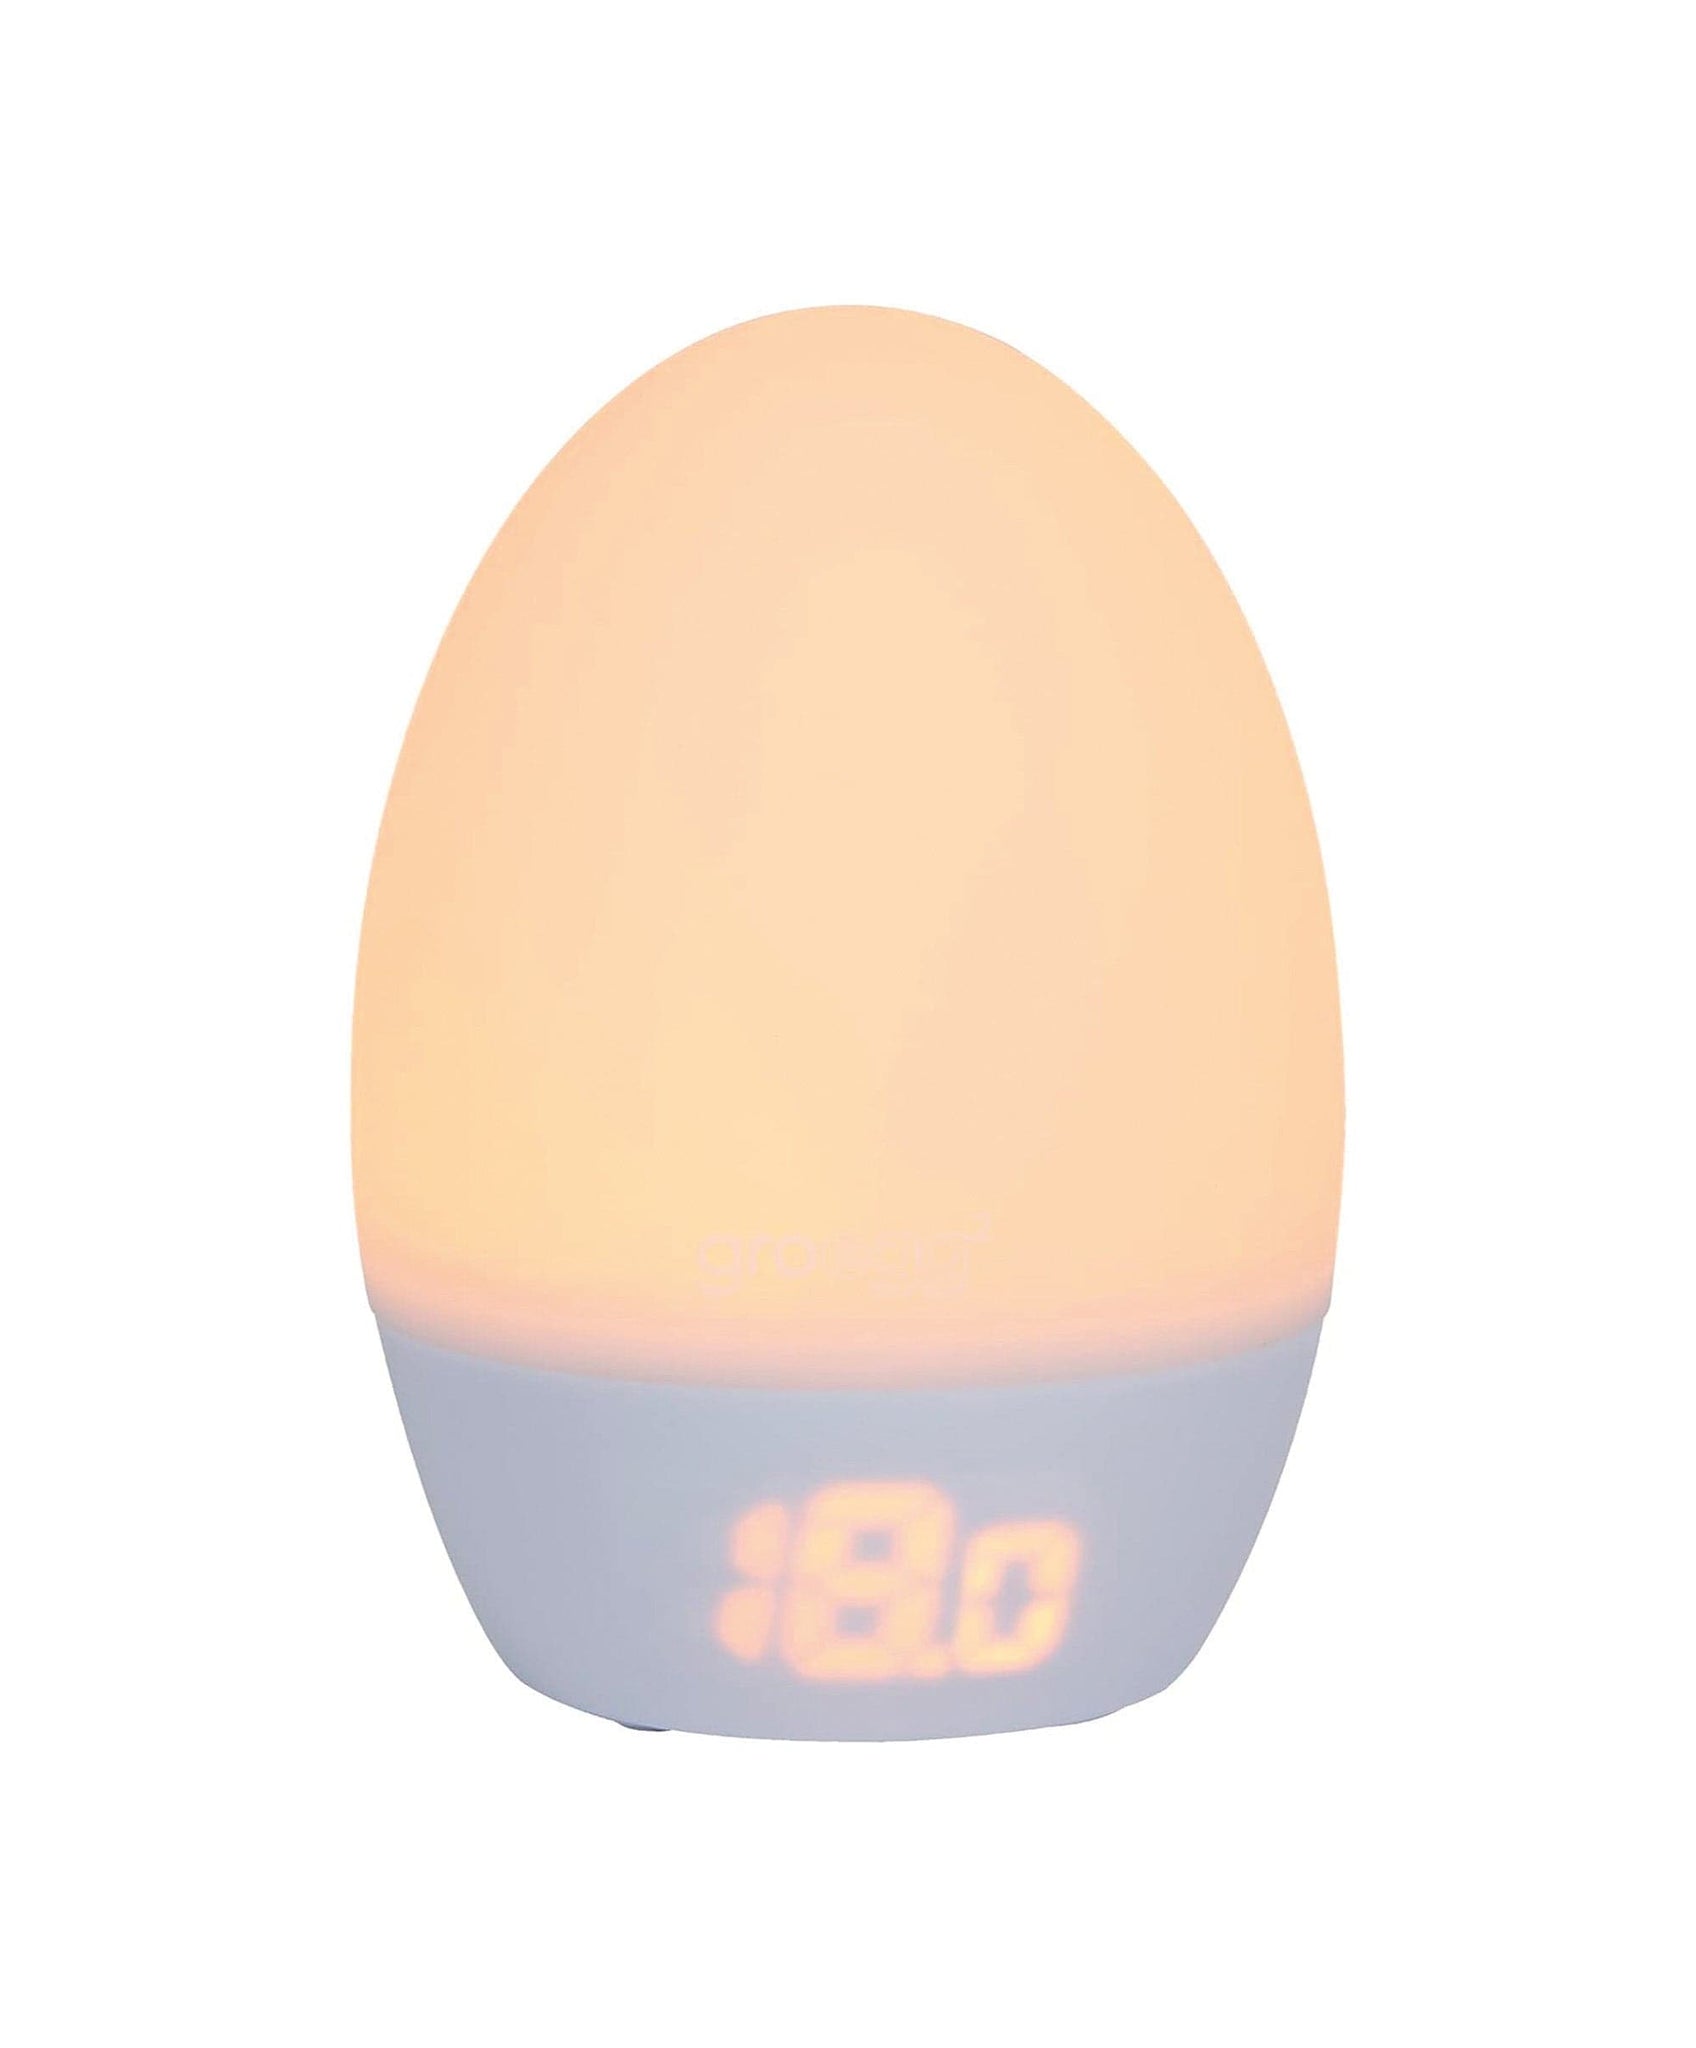 Gro-egg 2 room thermometer (As shown in session 2) - All About Antenatal